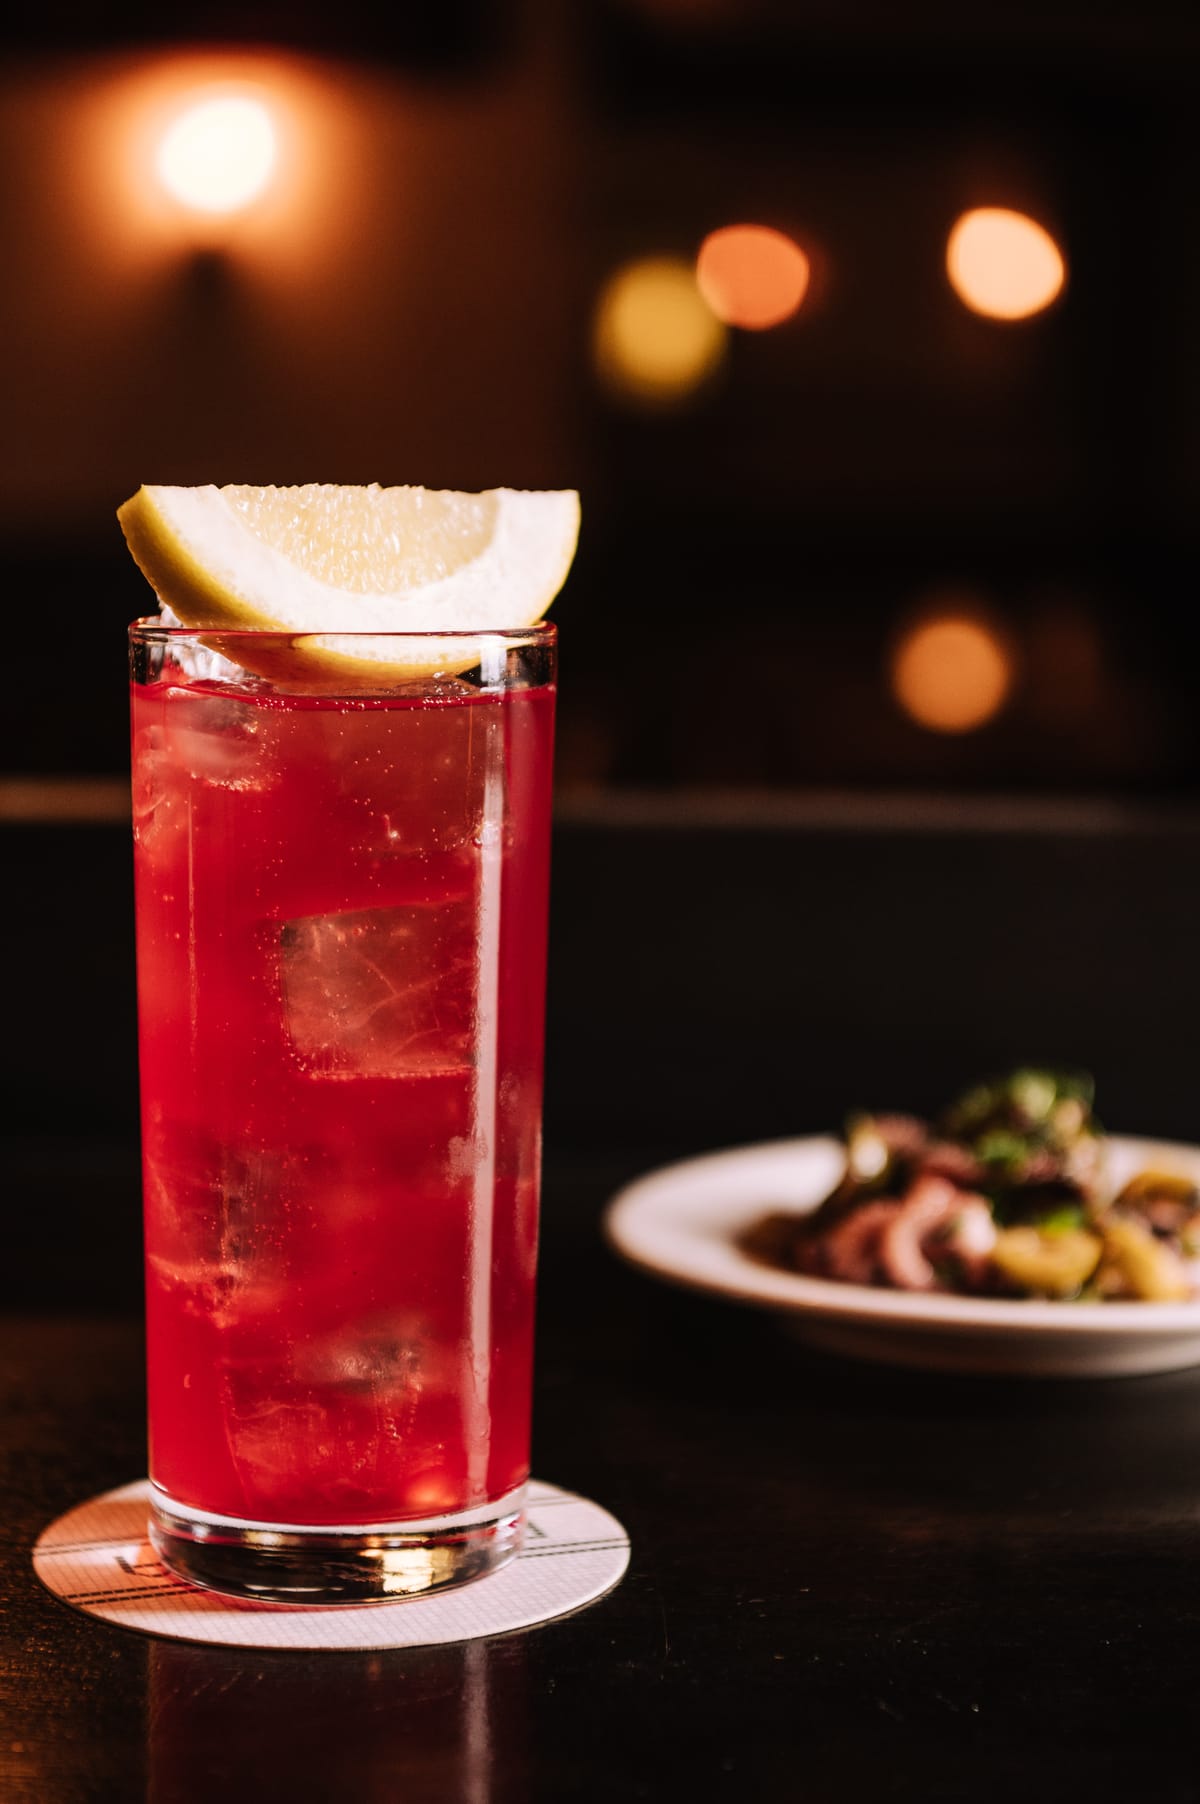 The Bistecca Sunset Americano is a tall glass of delicious